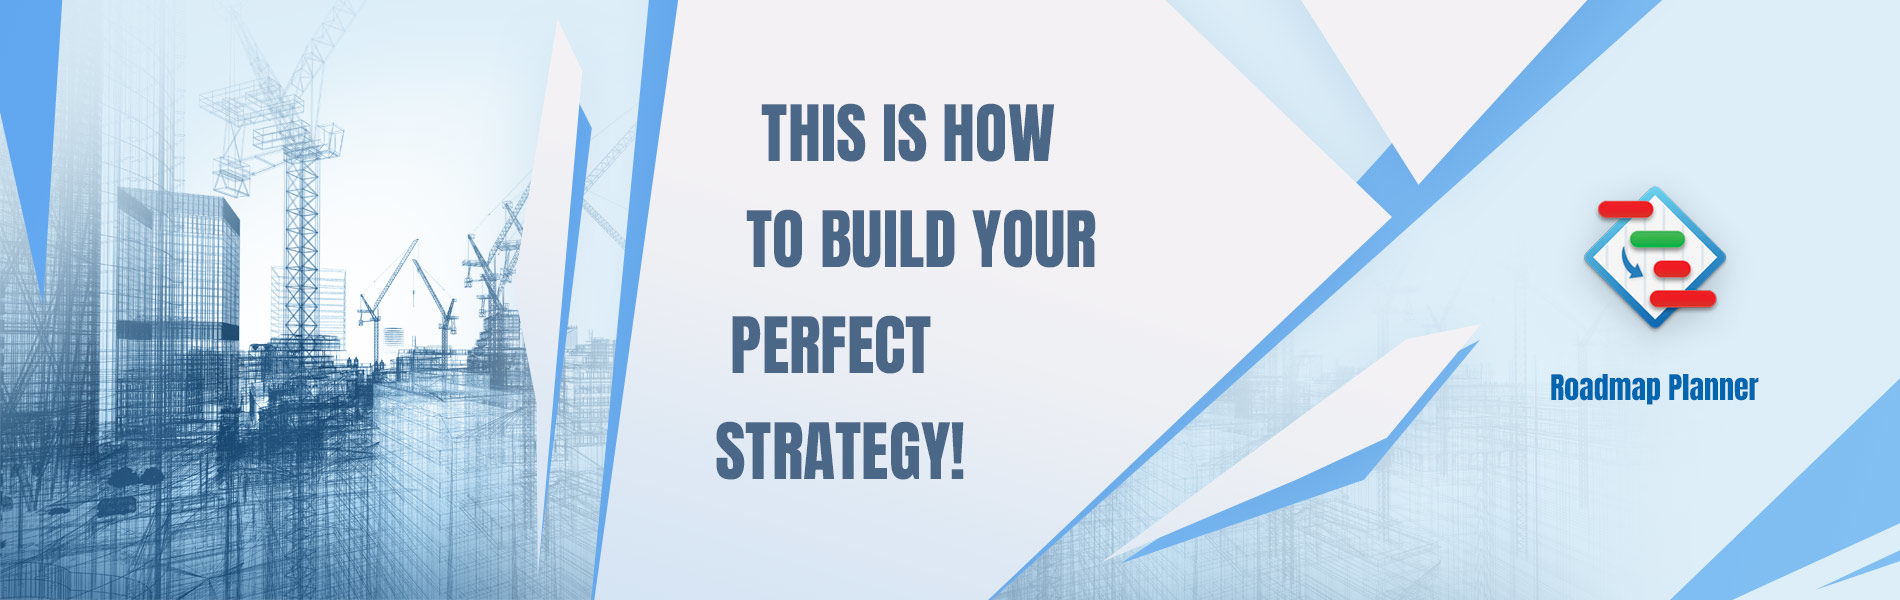 Build your perfect strategy